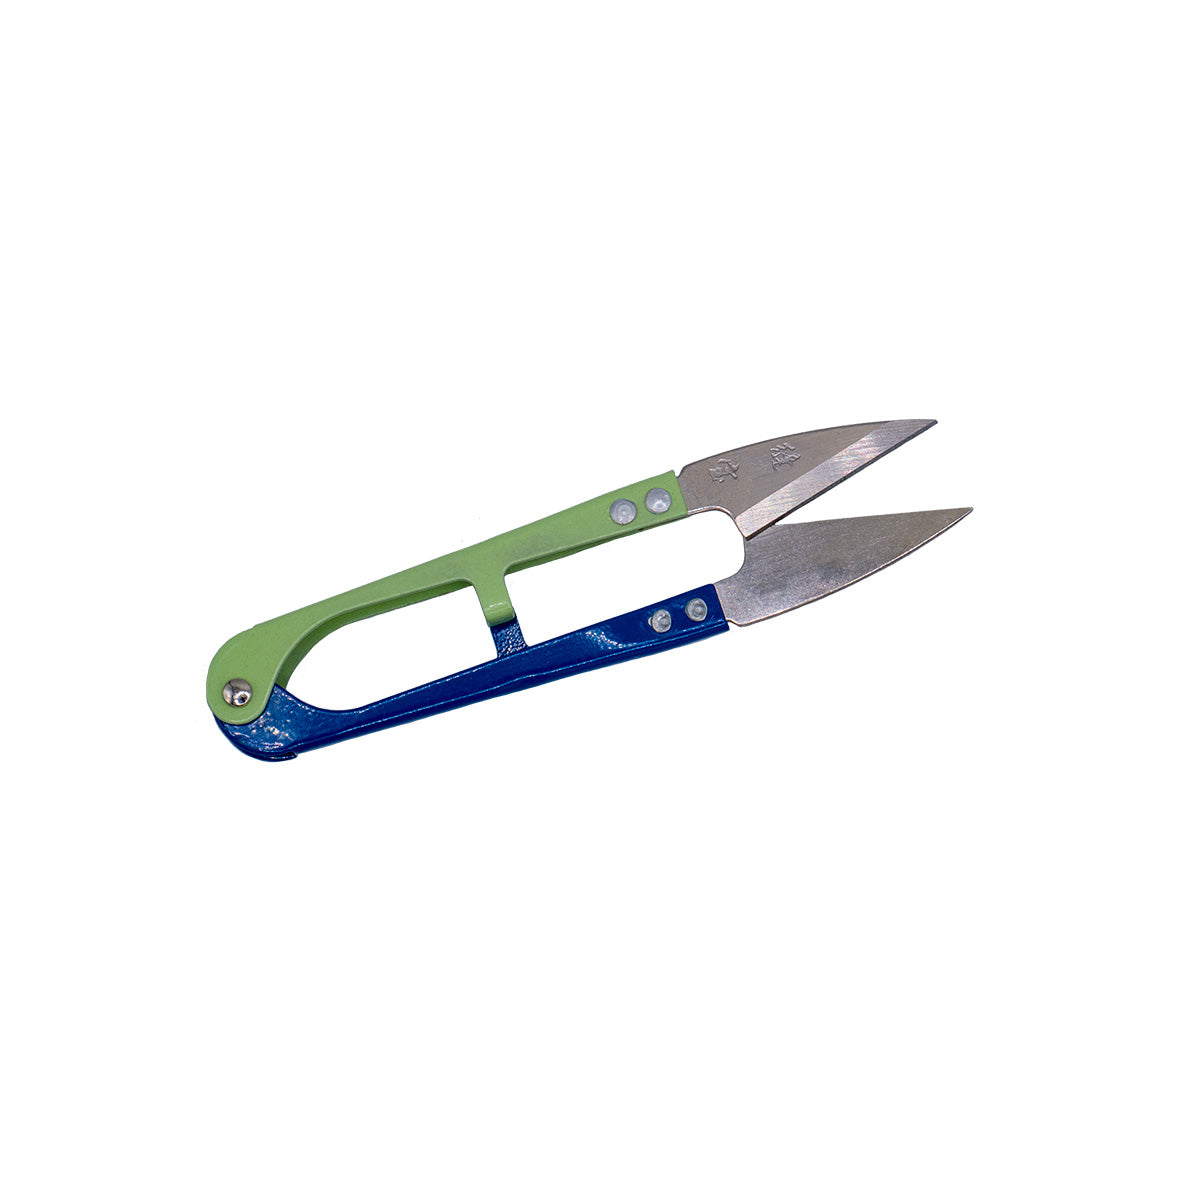 An image of the blue-and-green metal thread clippers with its blades open.